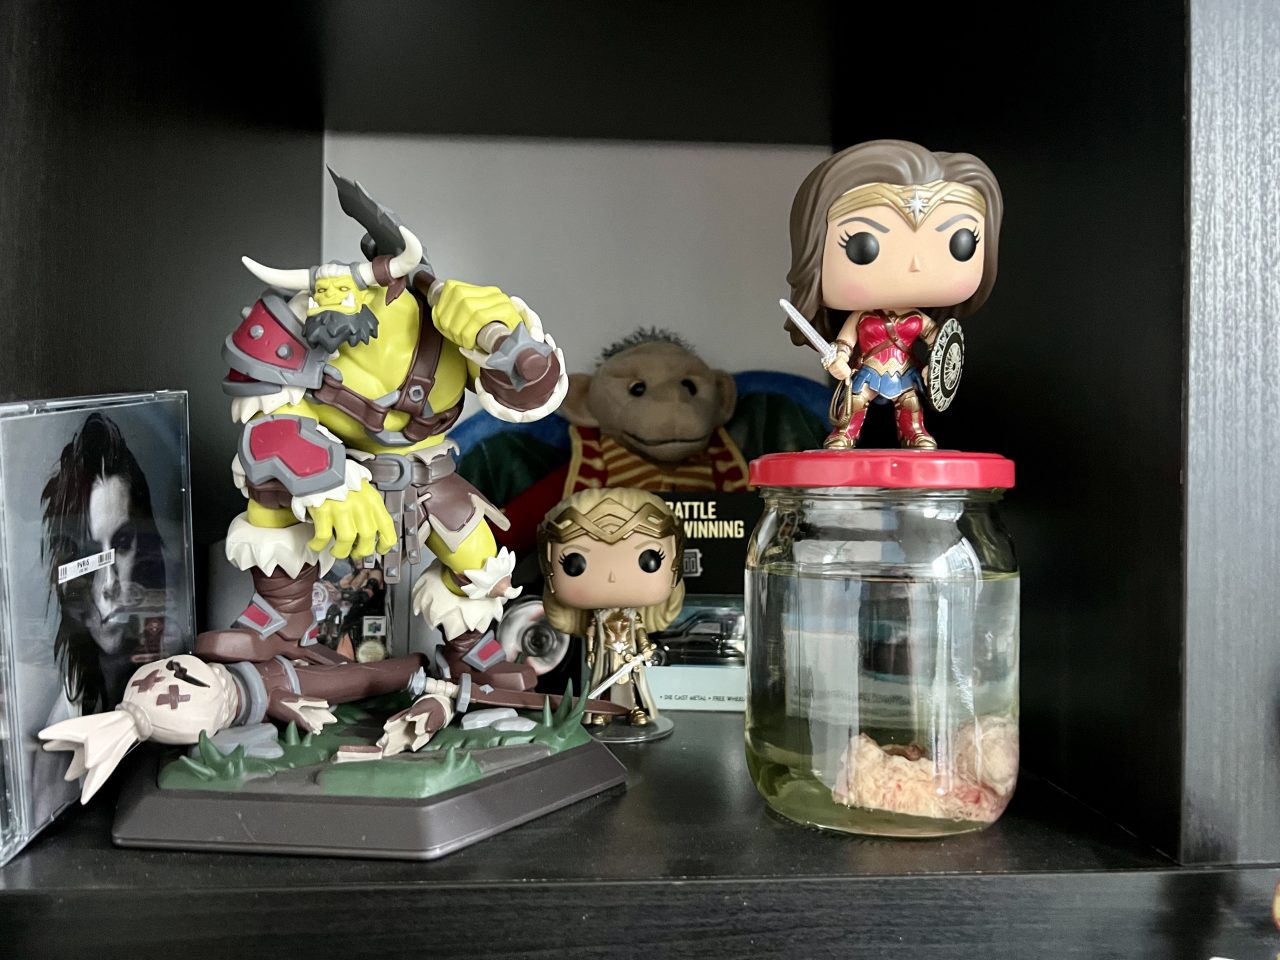 The jar is on a shelf, surrounded by action figures